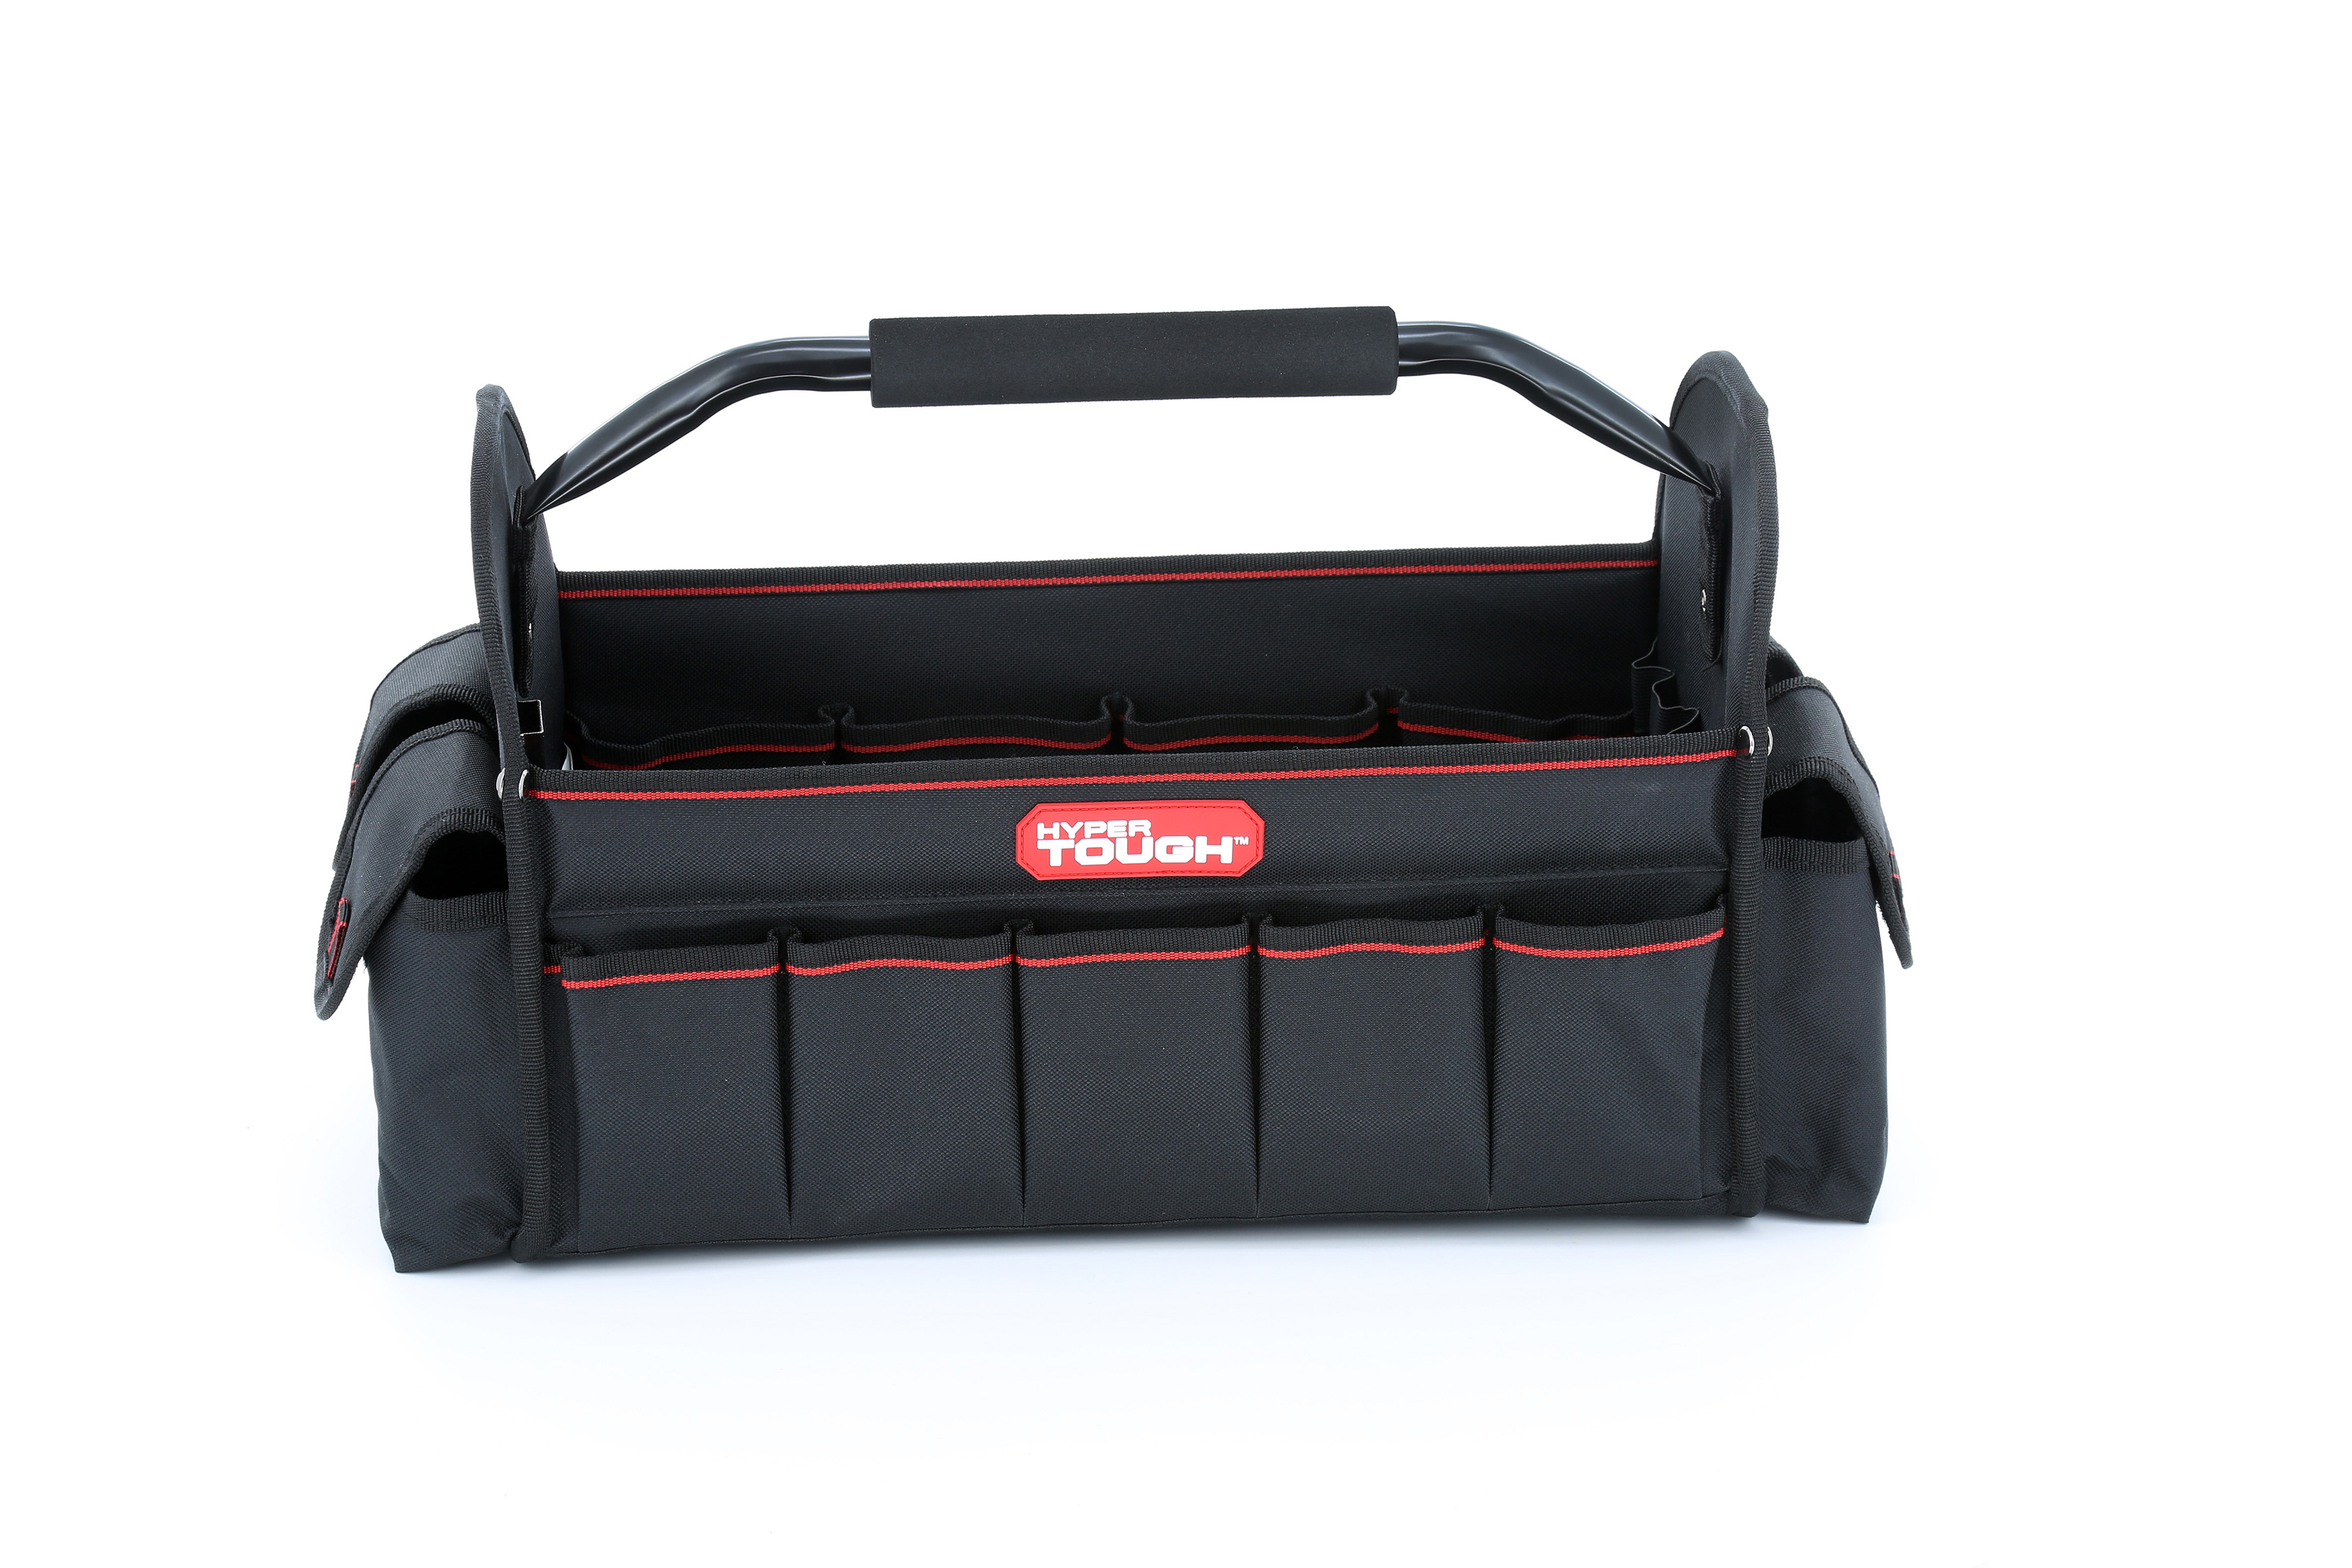  Stanley Open Tote Tool Bag 41cm (16in) : Clothing